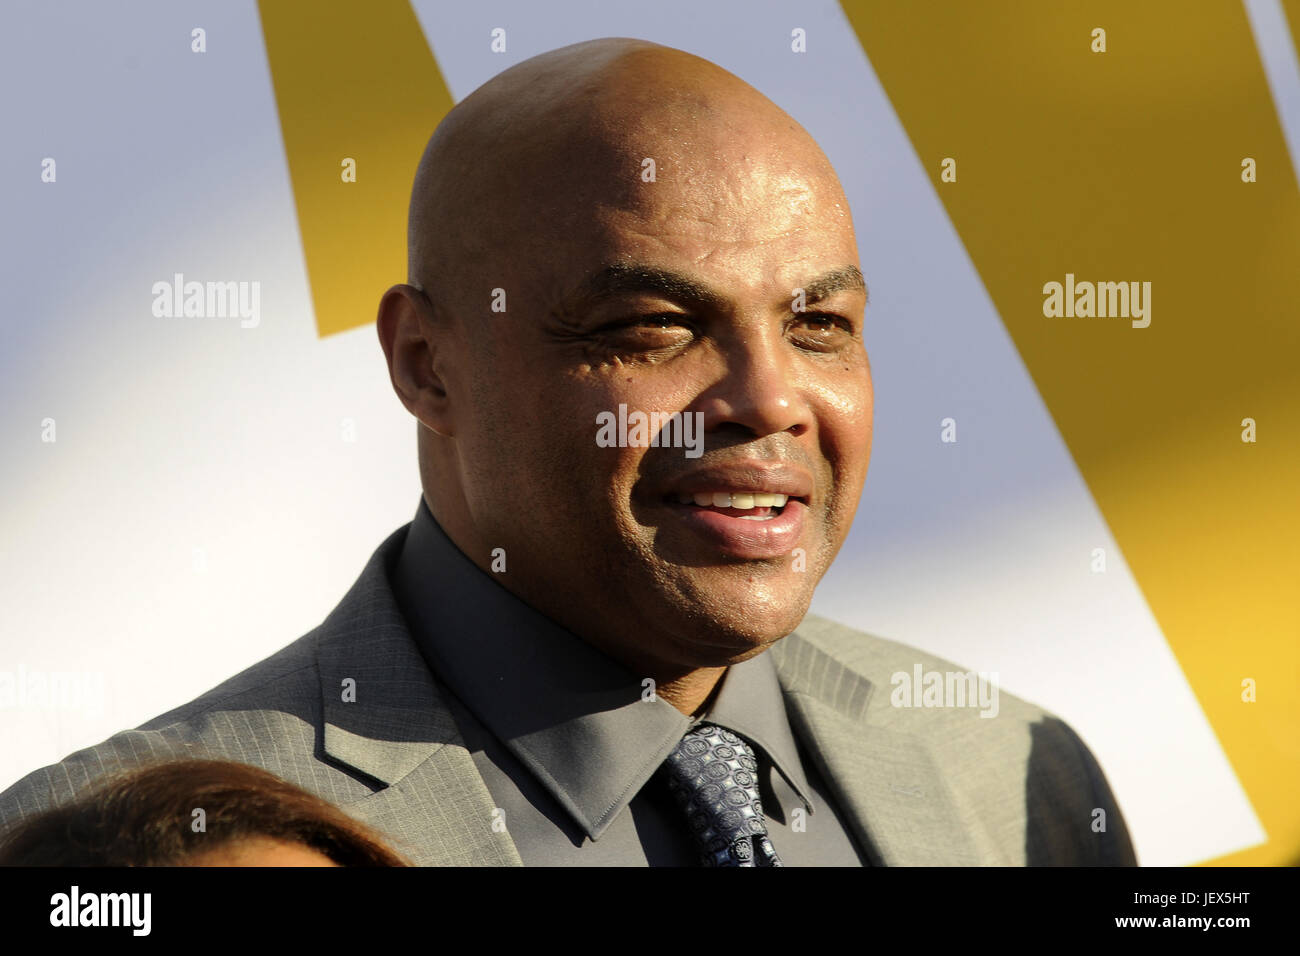 New York City. 26th June, 2017. Charles Barkley attends the NBA Awards 2017 at Basketball City on Pier 36 South Street on June 26, 2017 in New York City. | Verwendung weltweit Credit: dpa/Alamy Live News Stock Photo